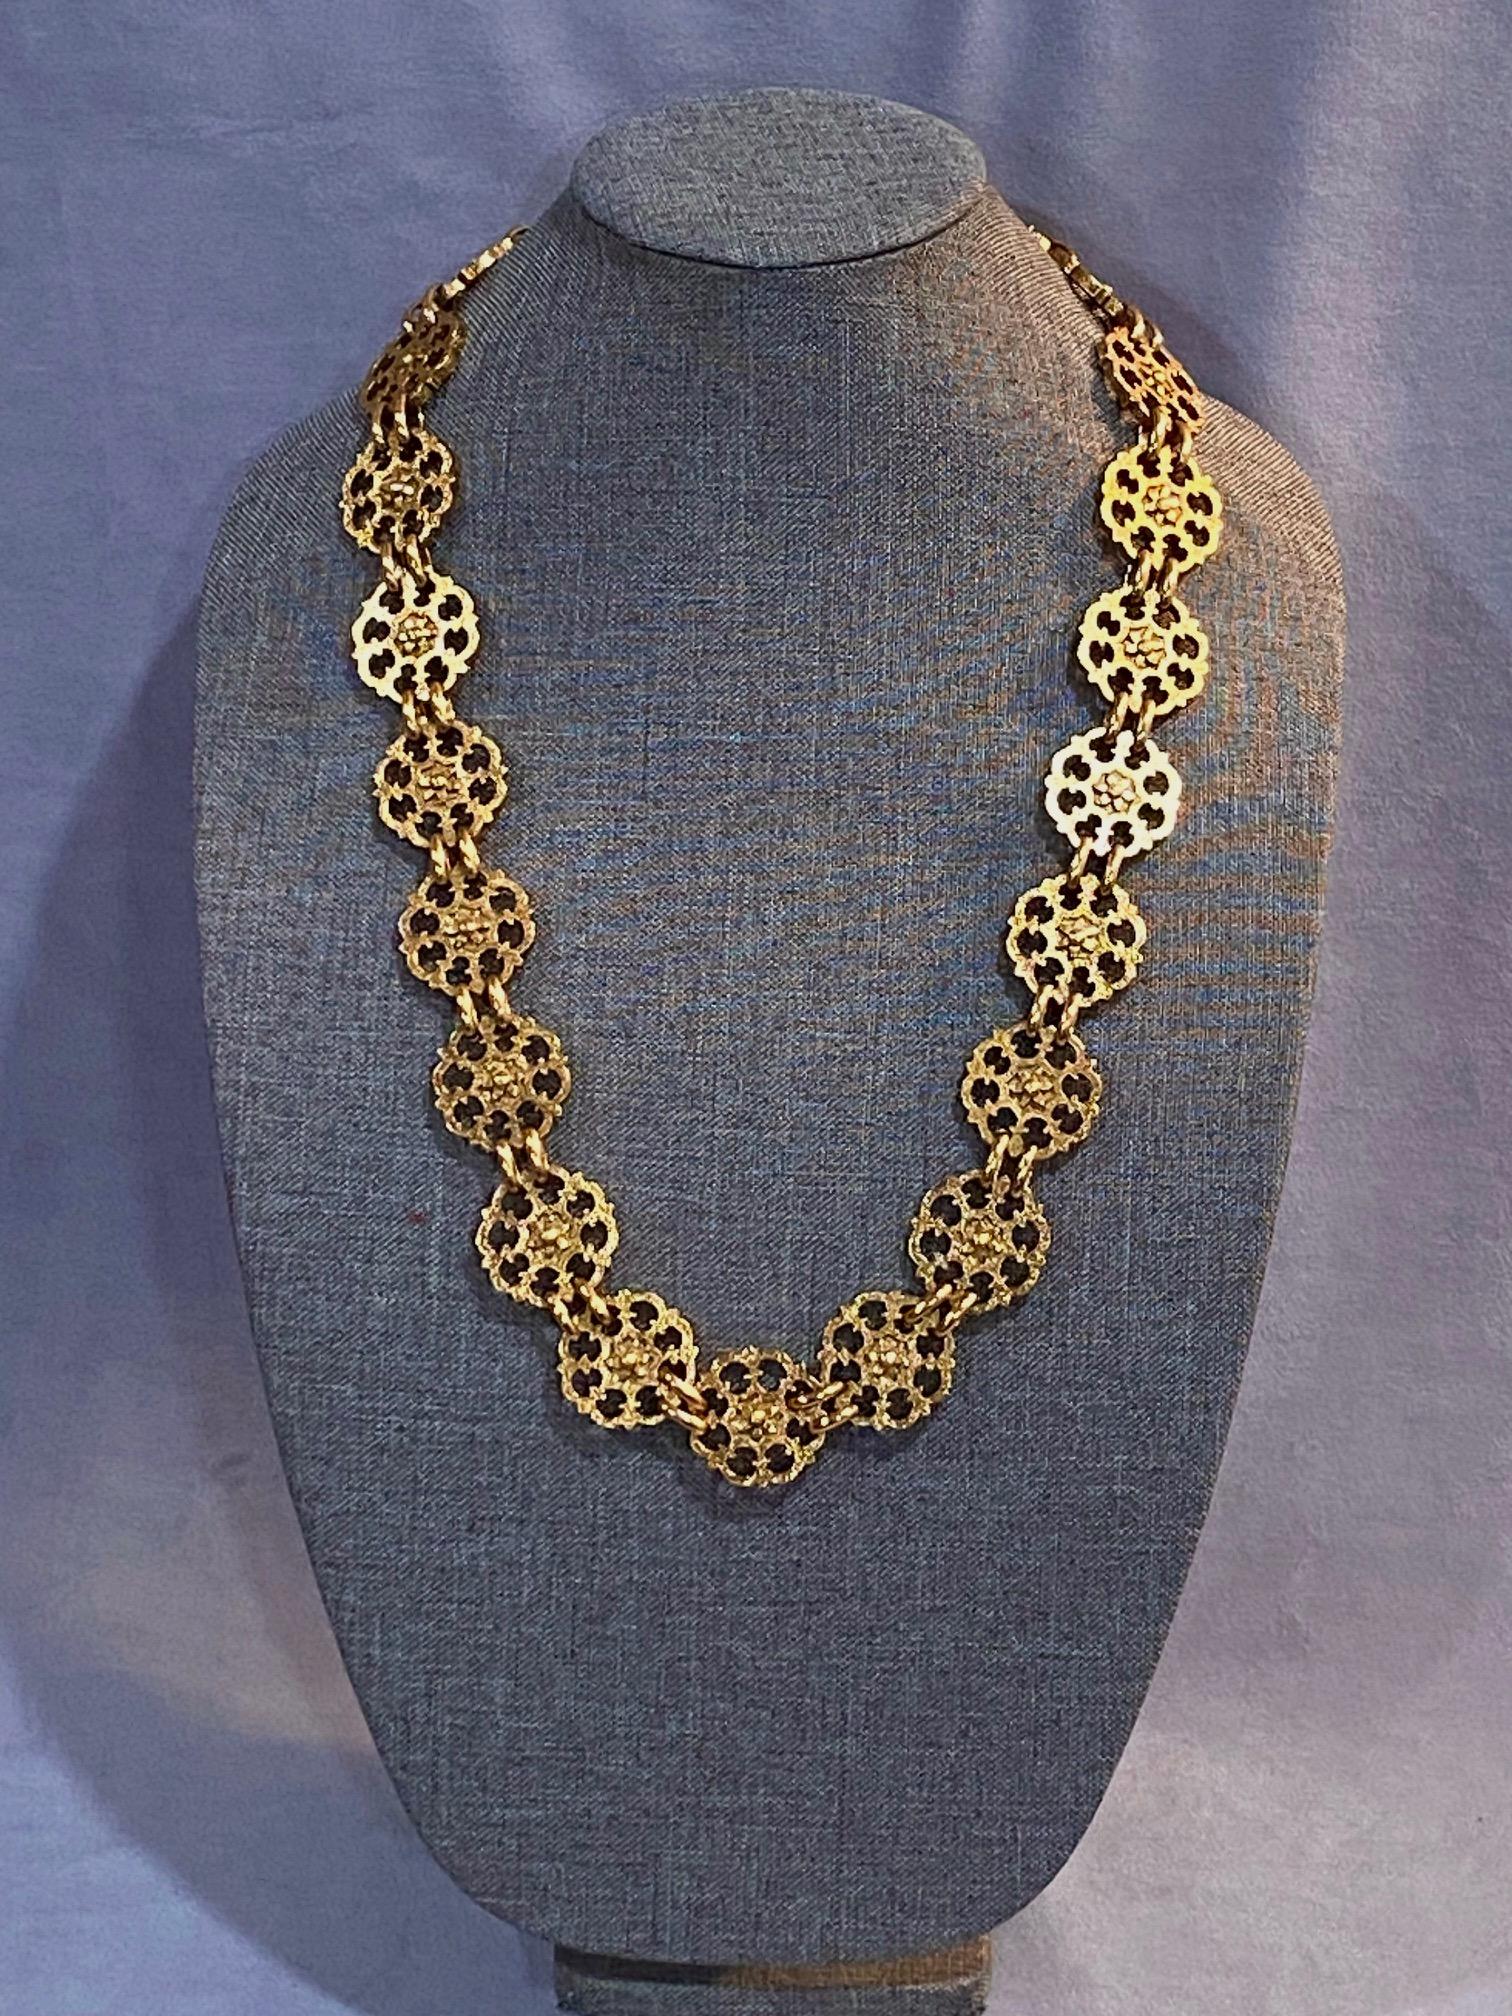 A beautiful and in excellent condition 1980s Yves Saint Laurent gold belt. The belt has a small hook and eye clasp and may easily be worn as a necklace as shown on a necklace form in the photos. There are 23 pierced metal rounded links in the design